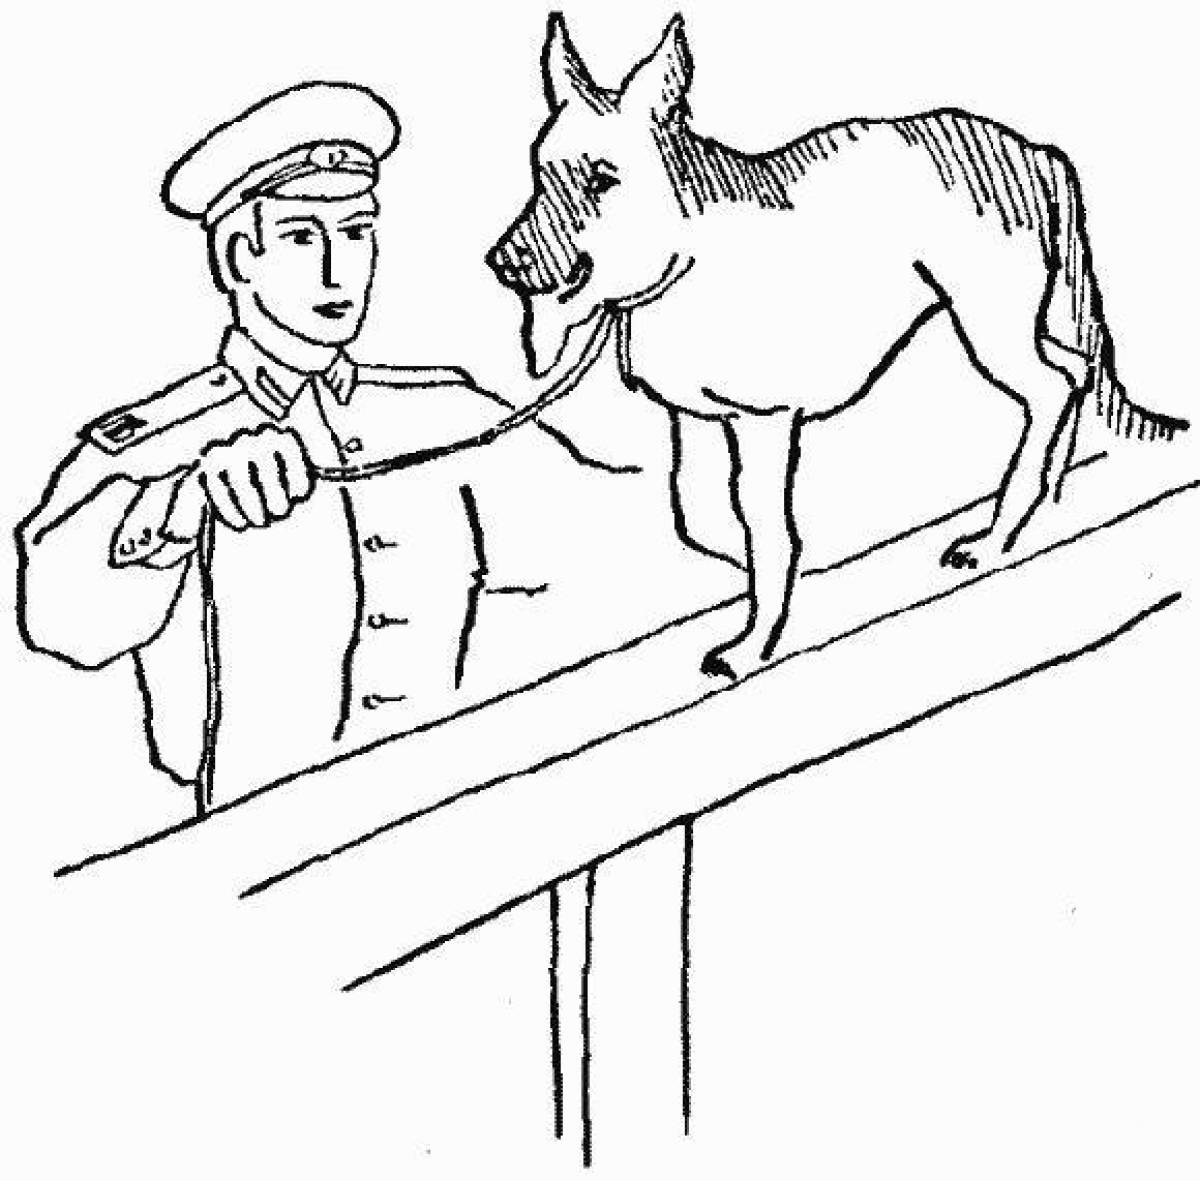 Border guard with dog #5